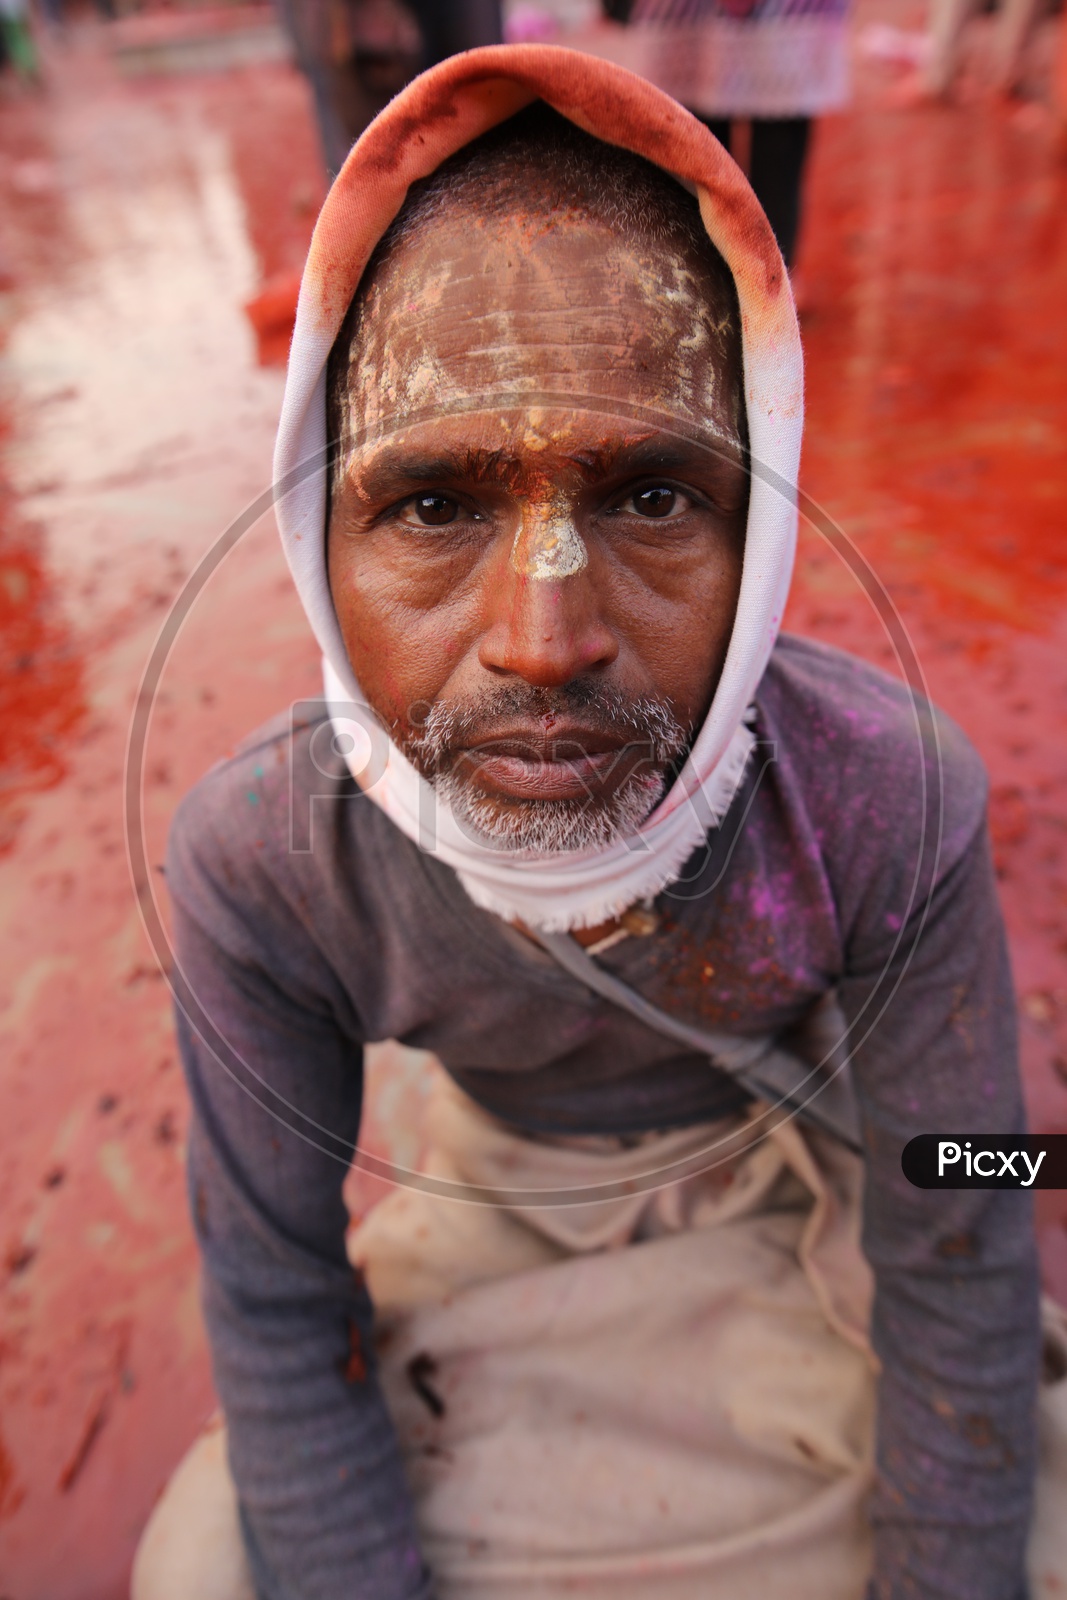 Man with Colors on his face - Holi Celebrations - Indian Festival - Colors/Colorful at Nandagaon